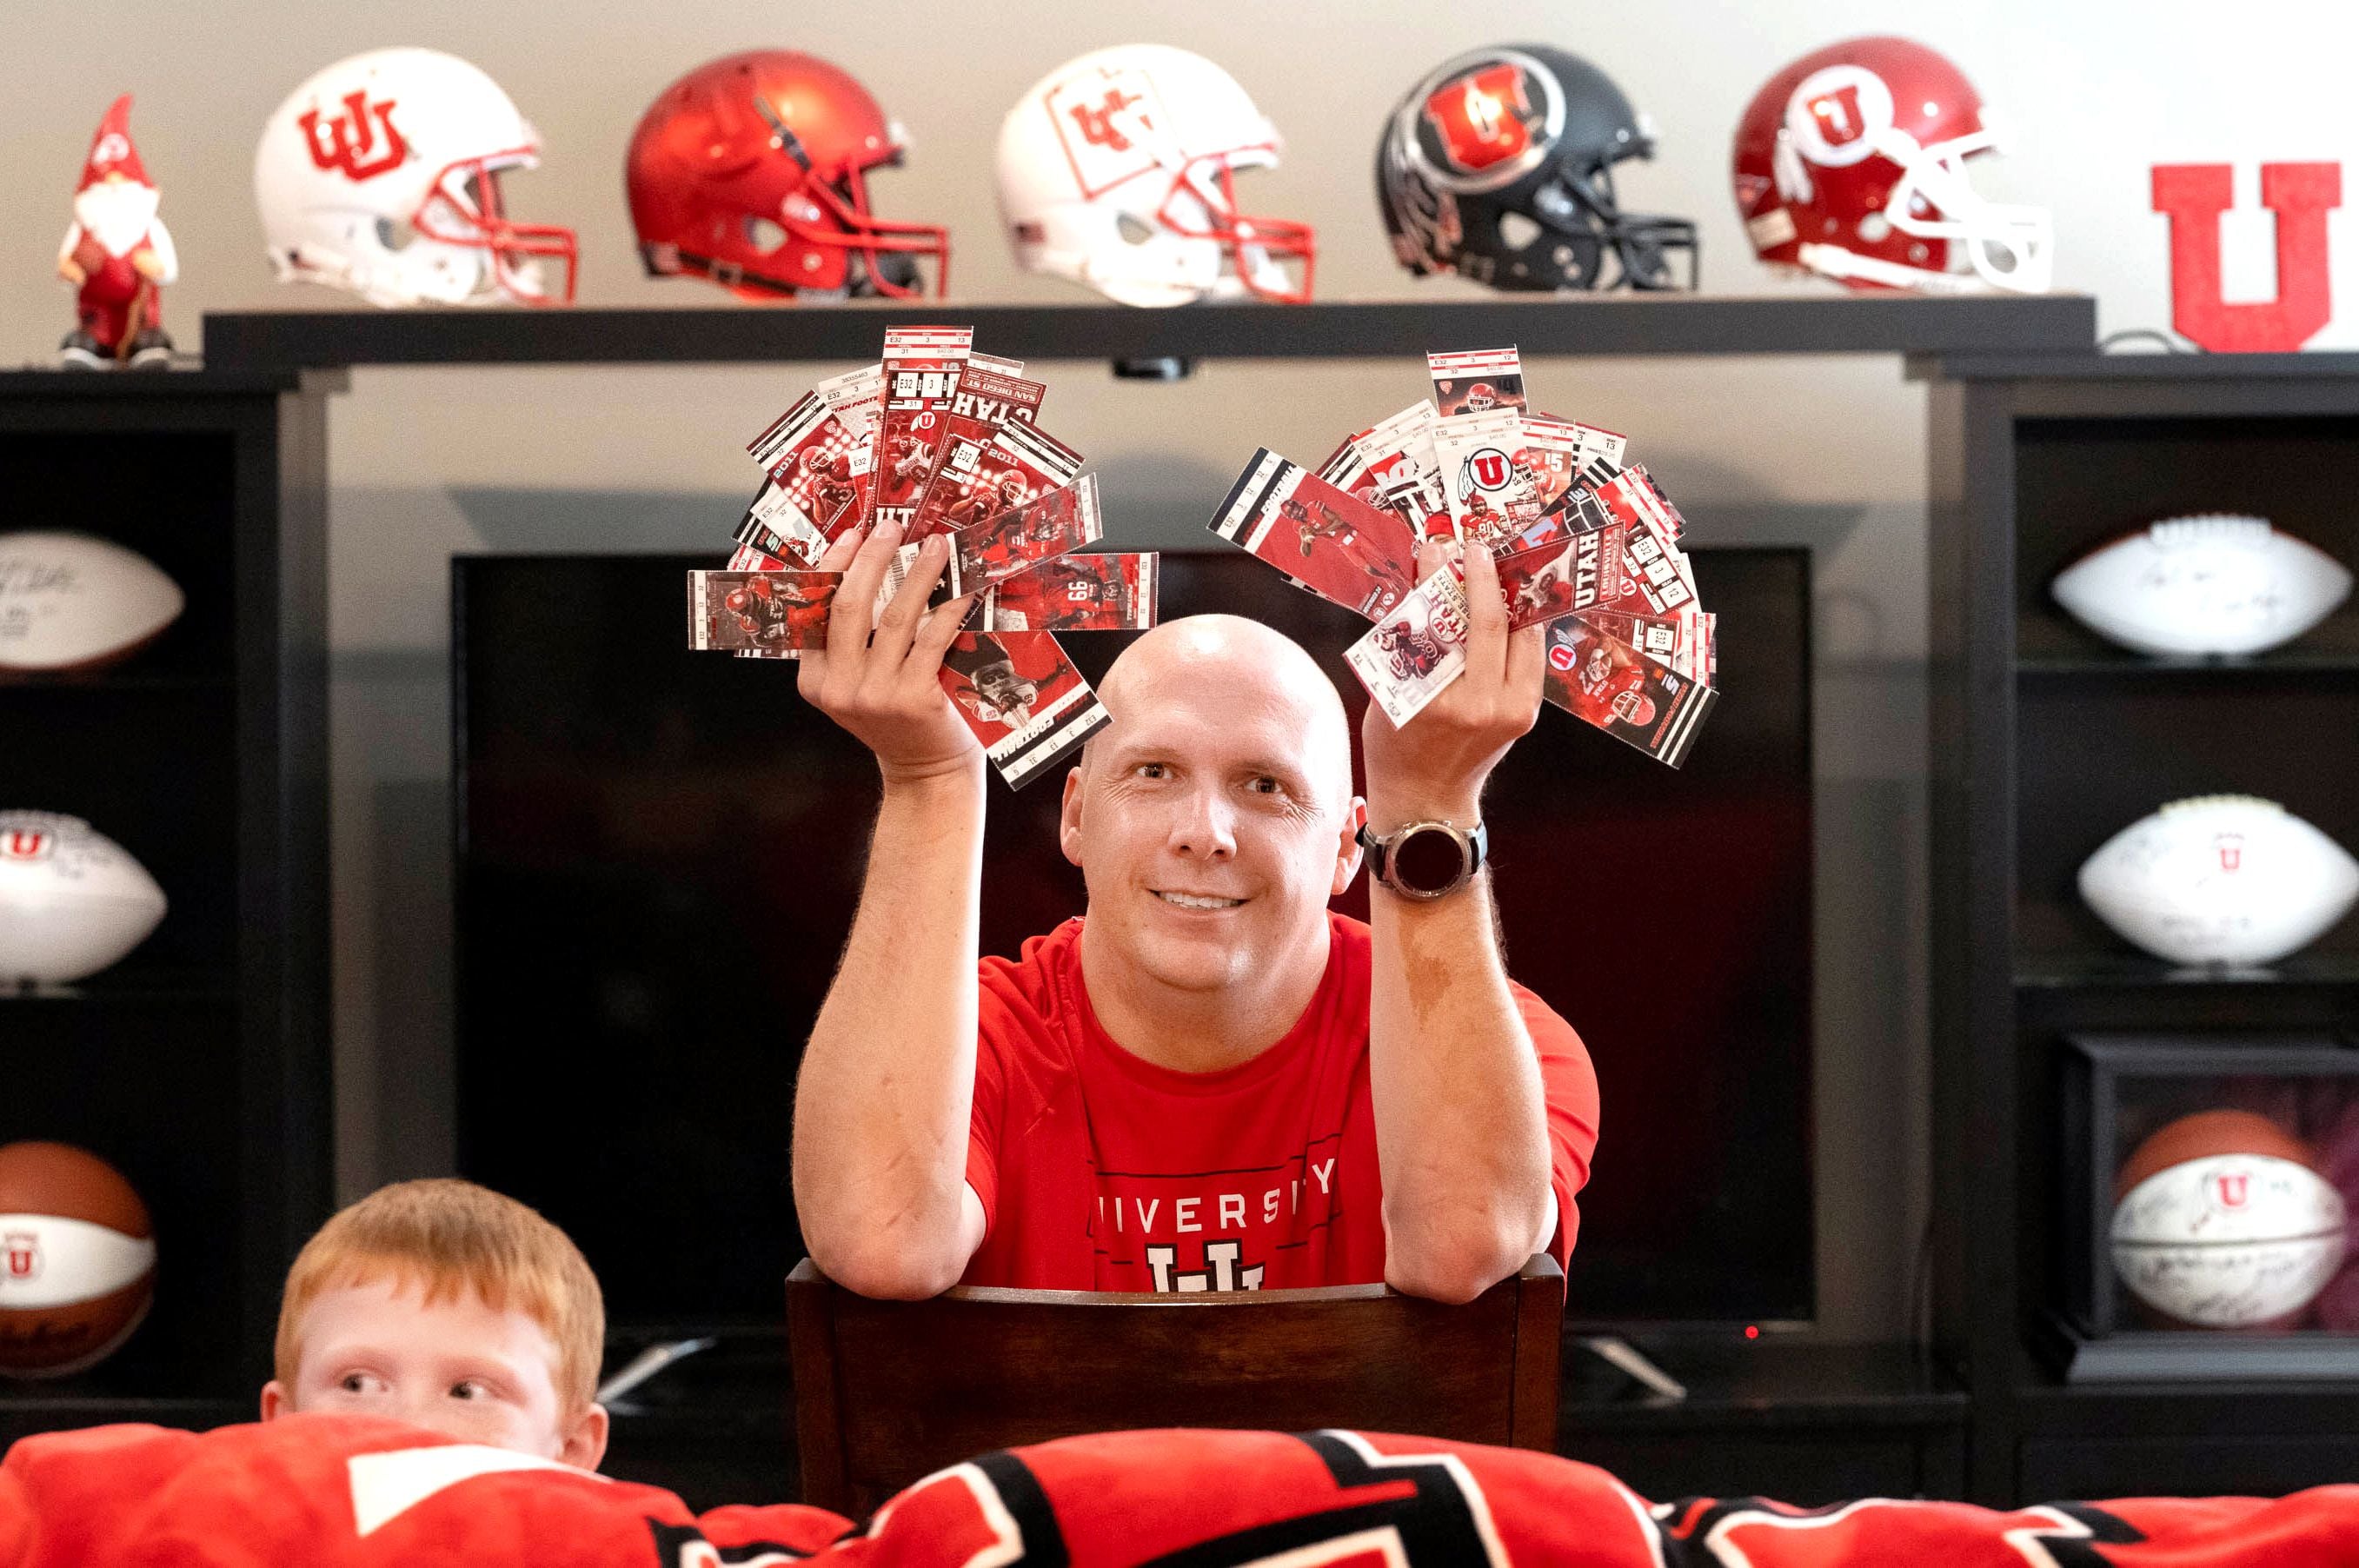 Utes ticket collectors just want to hold onto as an era in college football comes an end